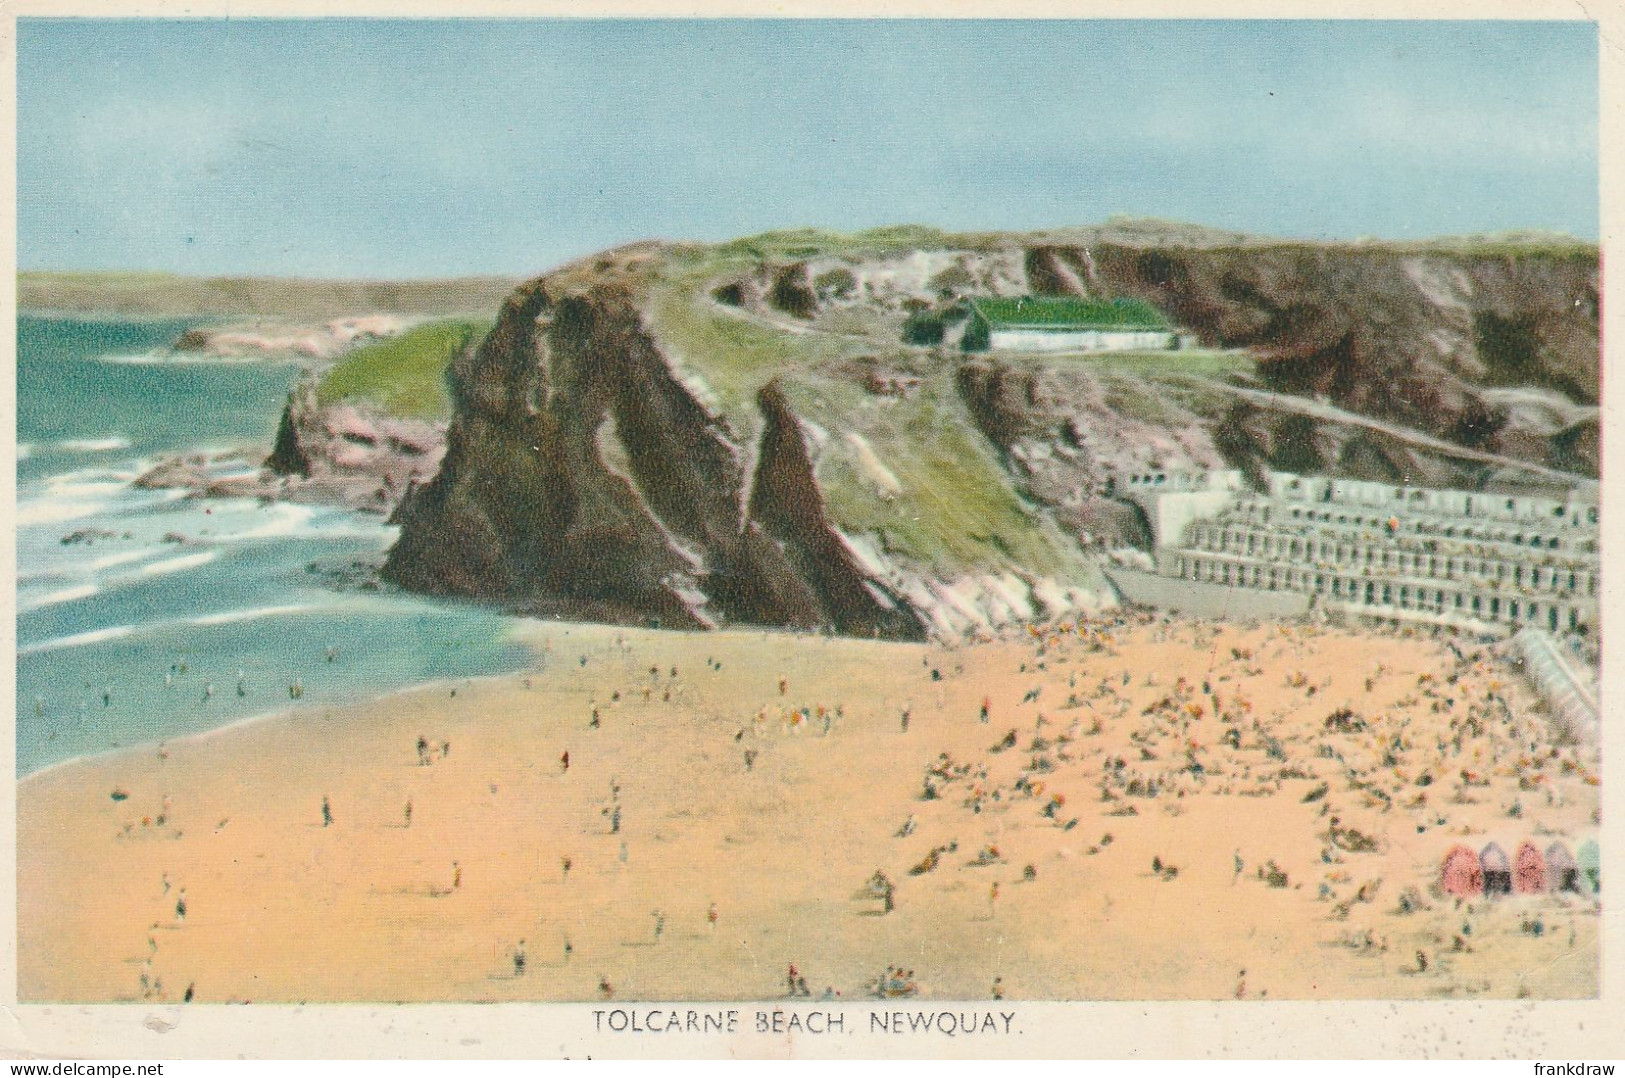 Postcard - Tolcarne Beach Newquay - No Card No - Very Good - Unclassified